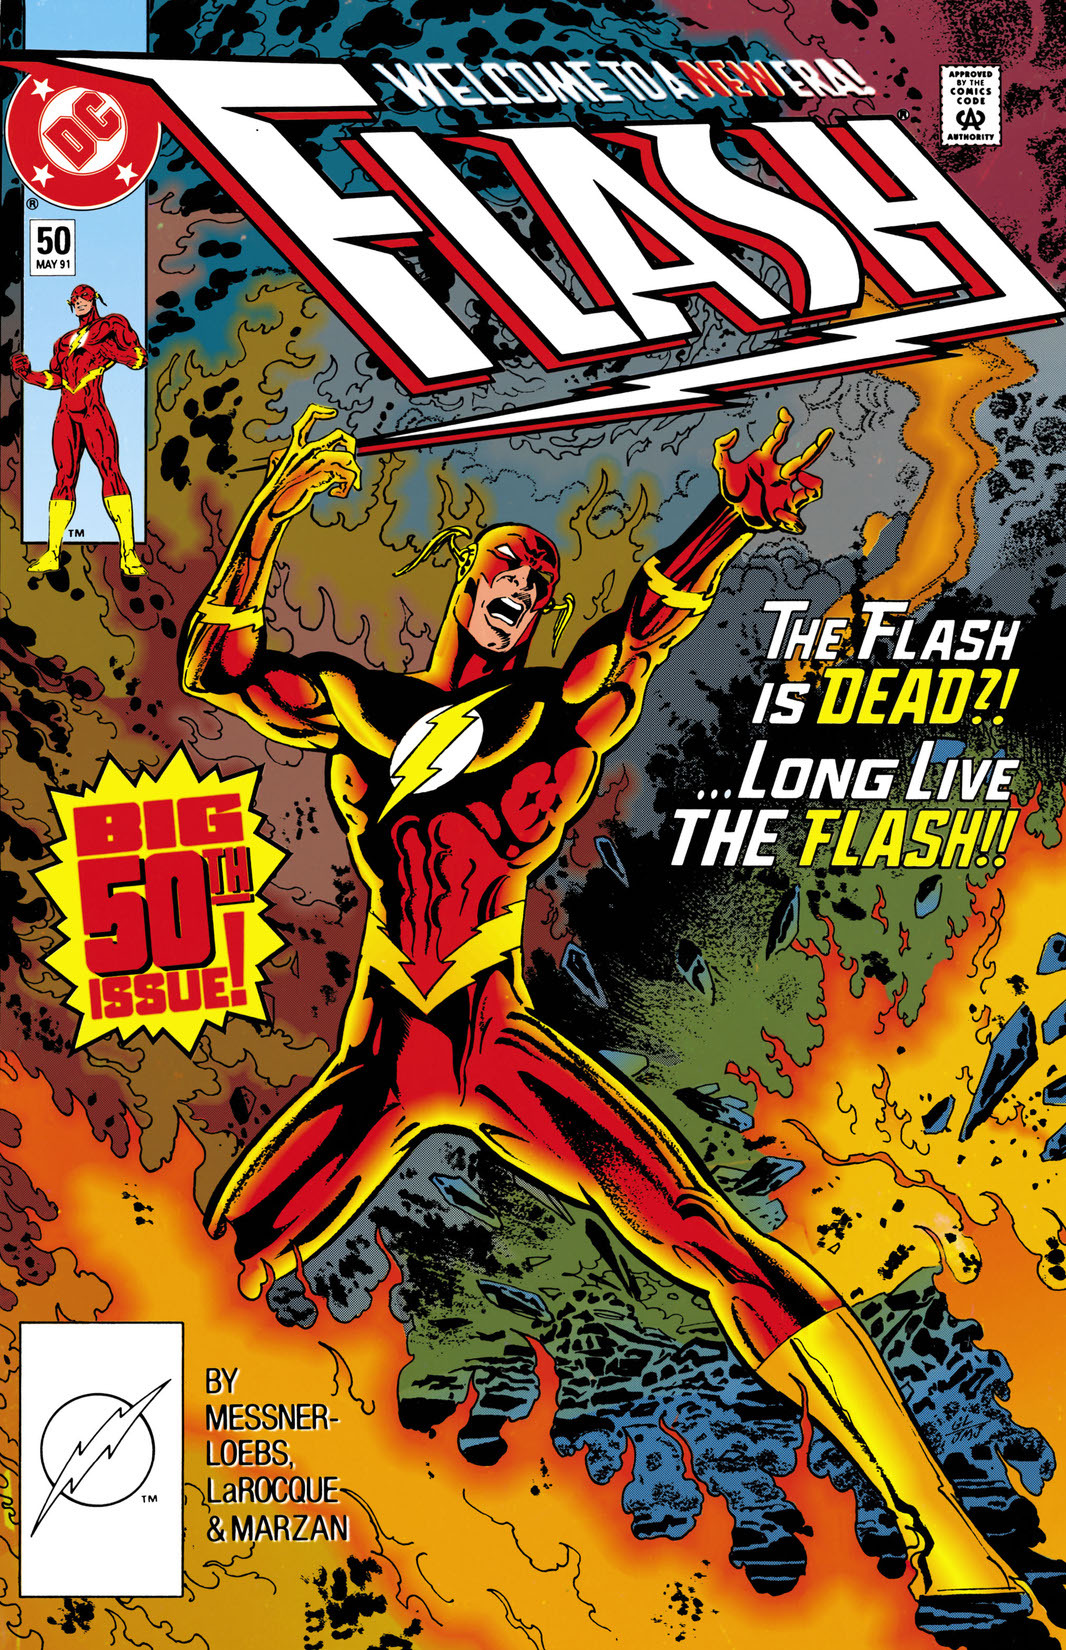 The Flash (1987-) #50 preview images